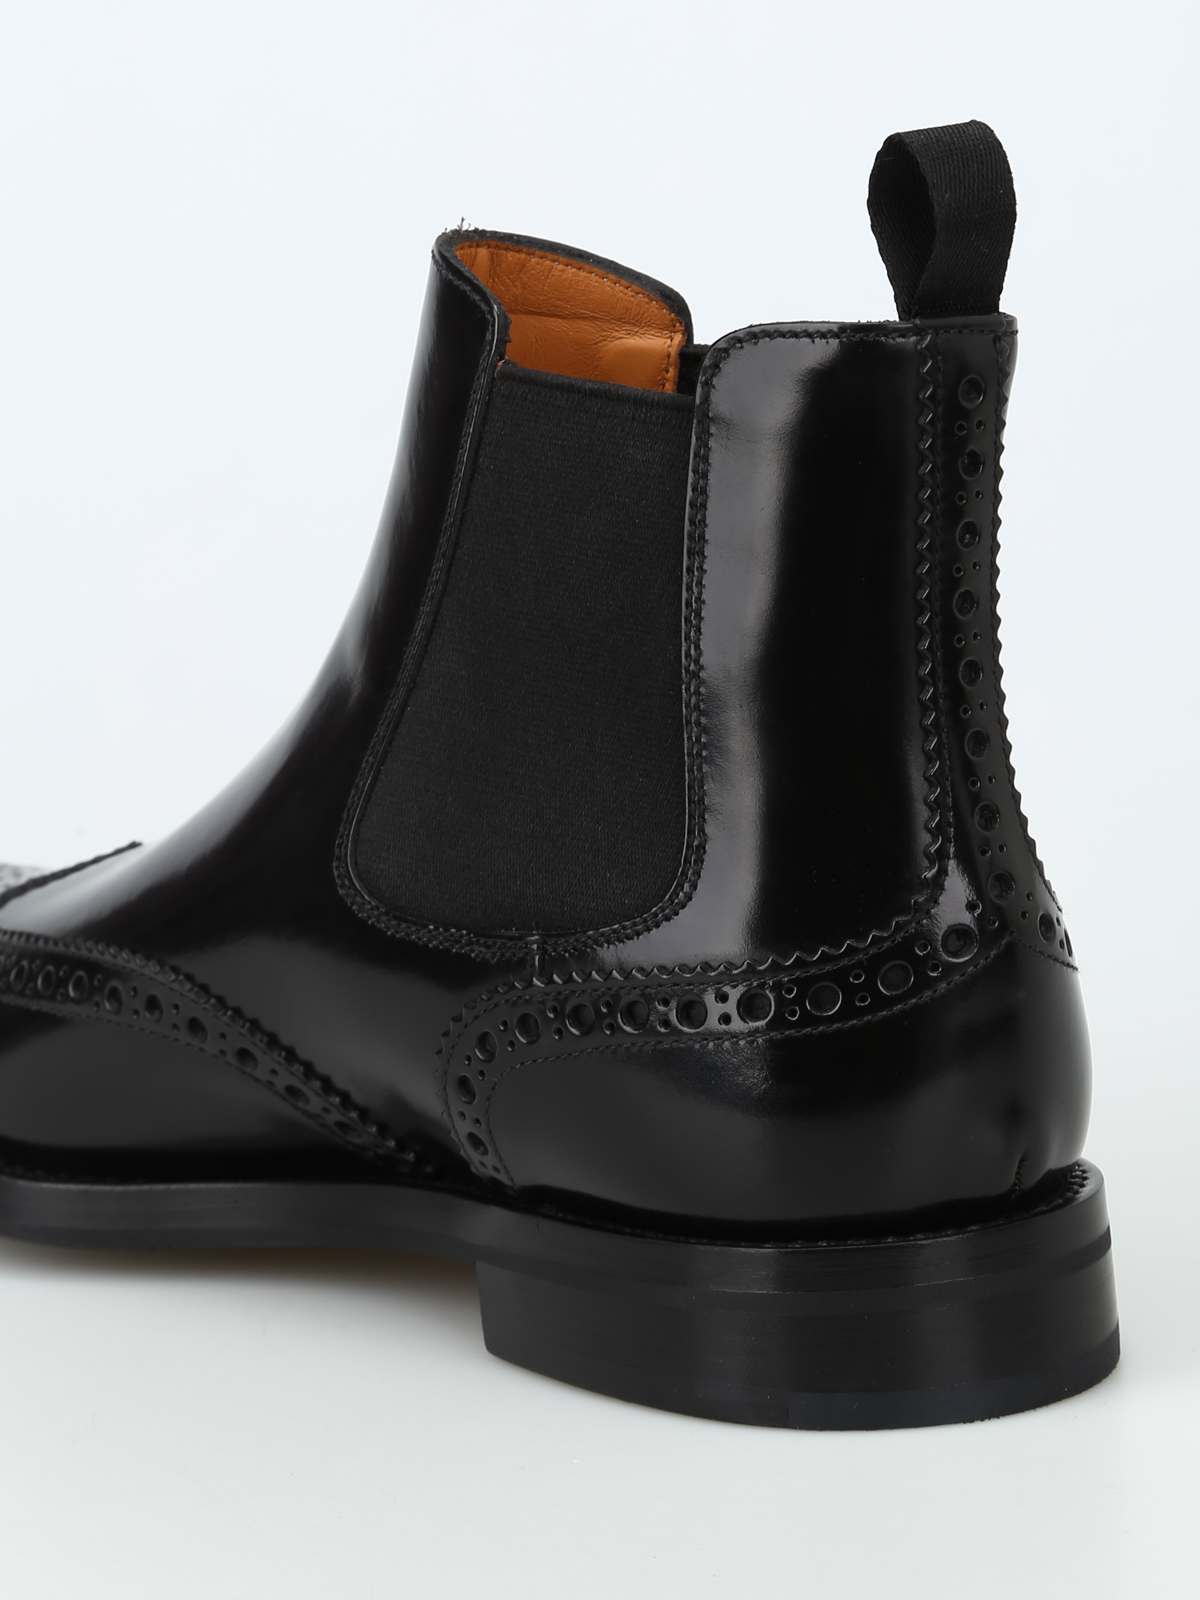 Andet Link projektor Ankle boots Church's - Black polish binder brogue Chelsea boots -  DT00019XVF0AAB